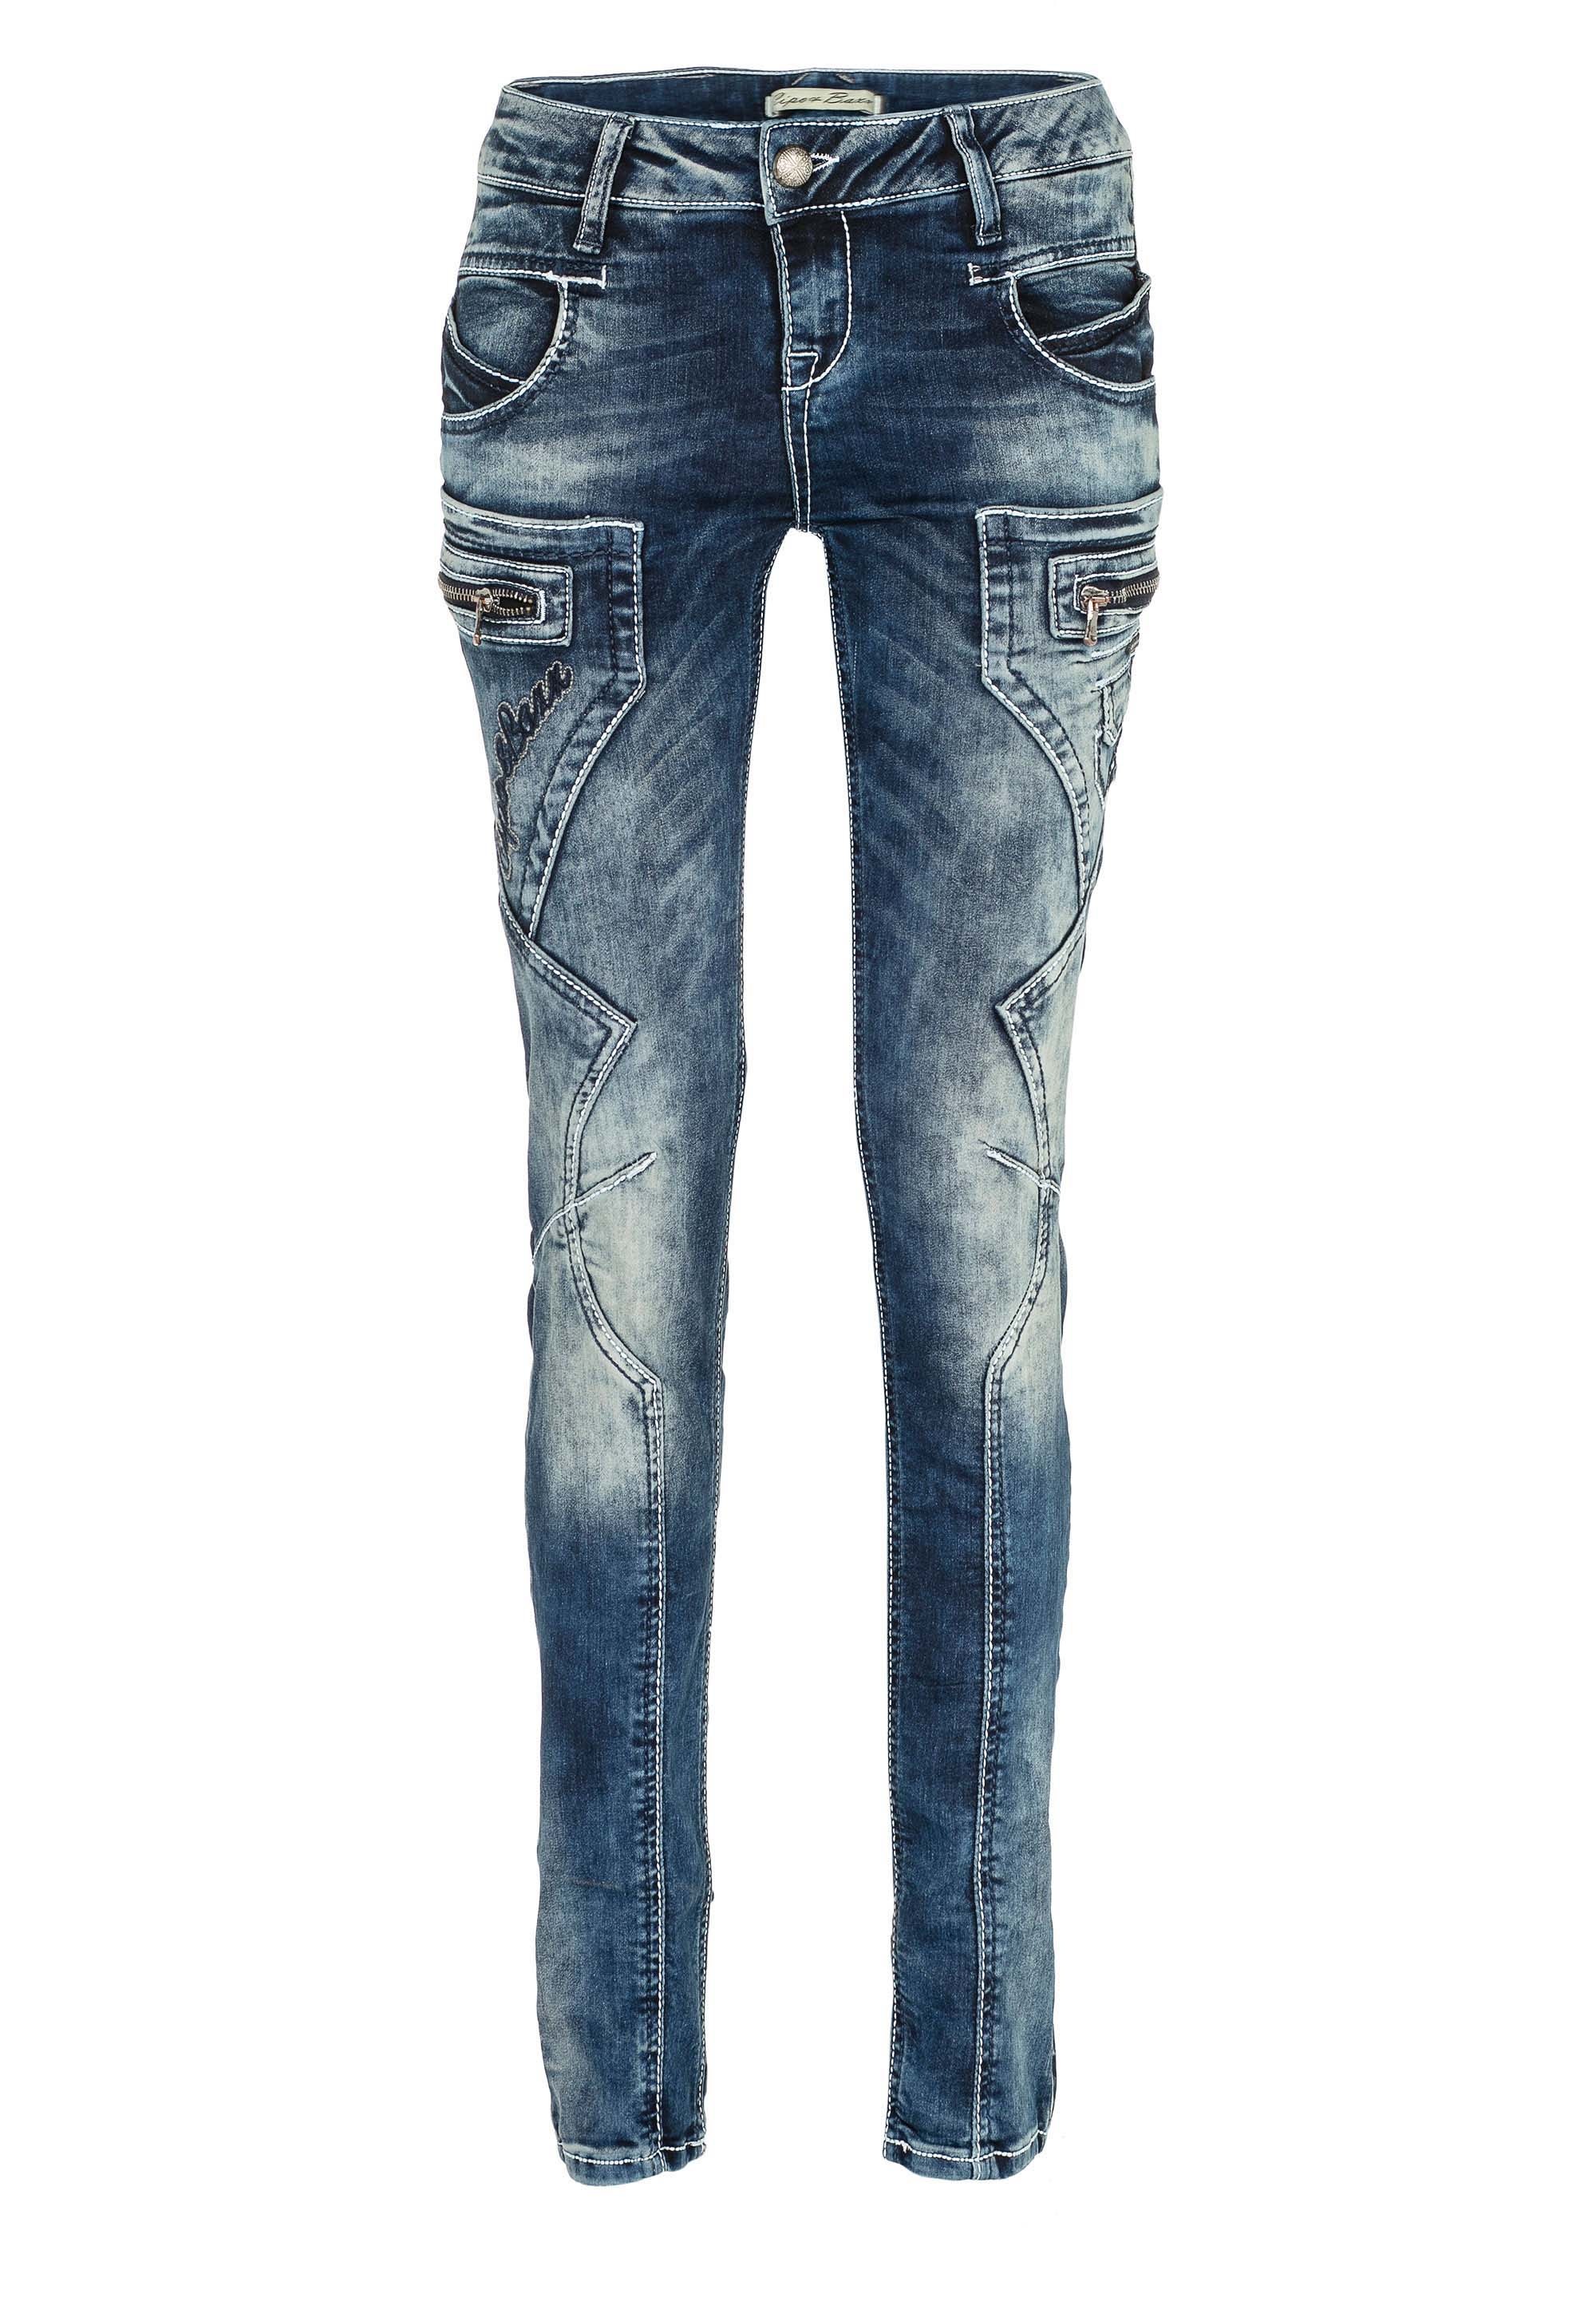 Cipo & Baxx Bequeme Jeans, mit niedriger Taille in Straight Fit